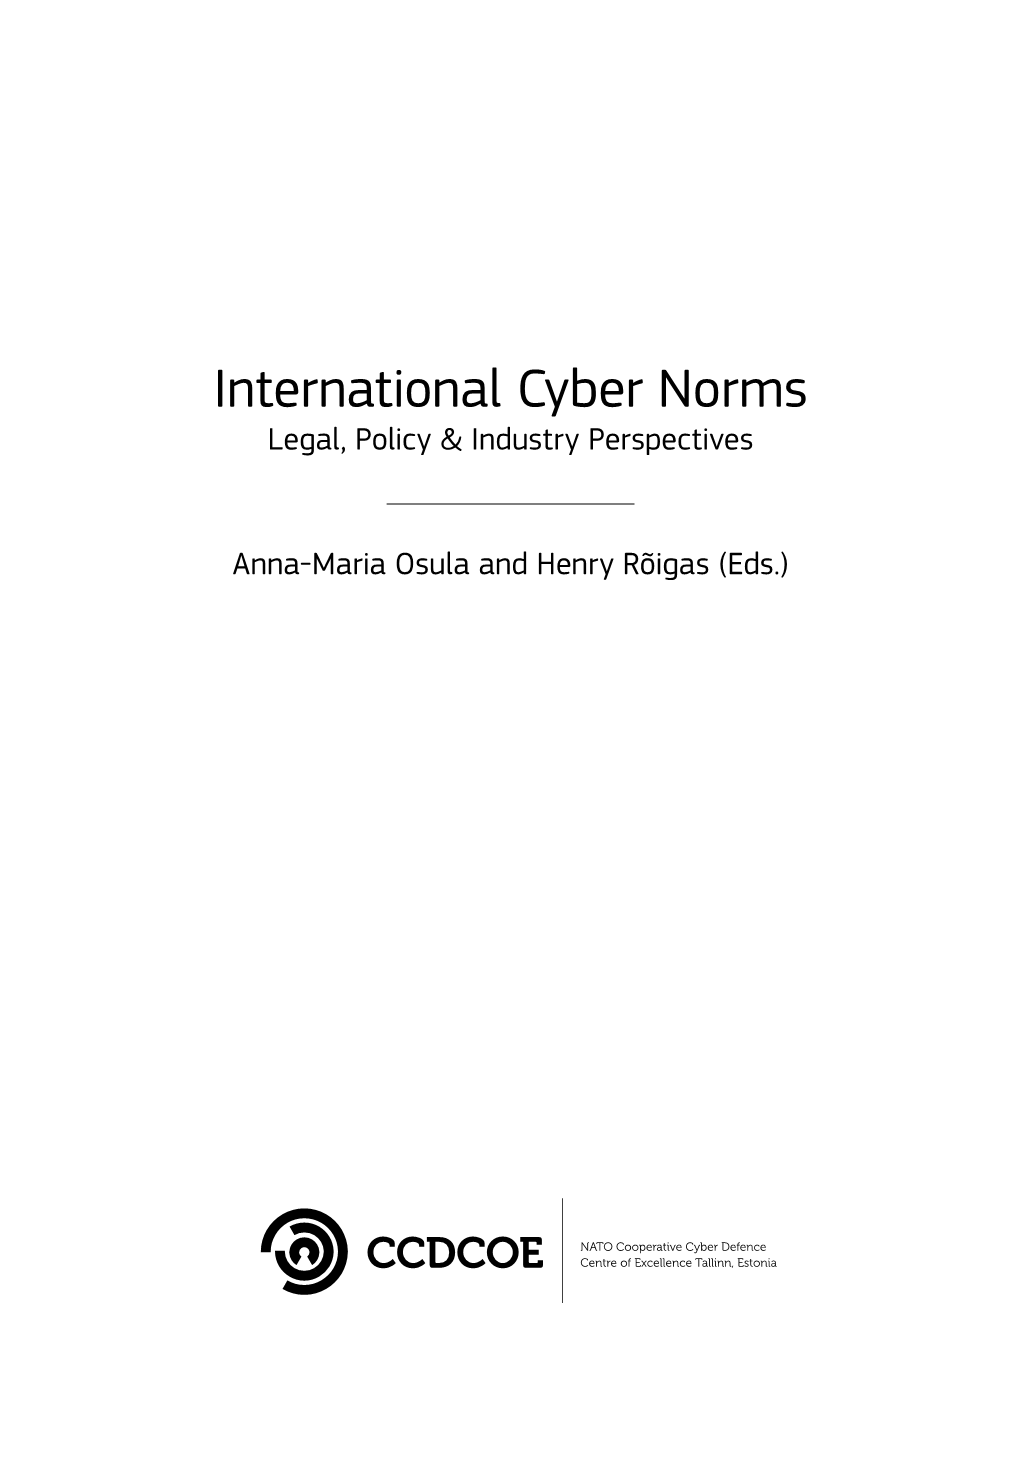 International Cyber Norms: Legal, Policy & Industry Perspectives